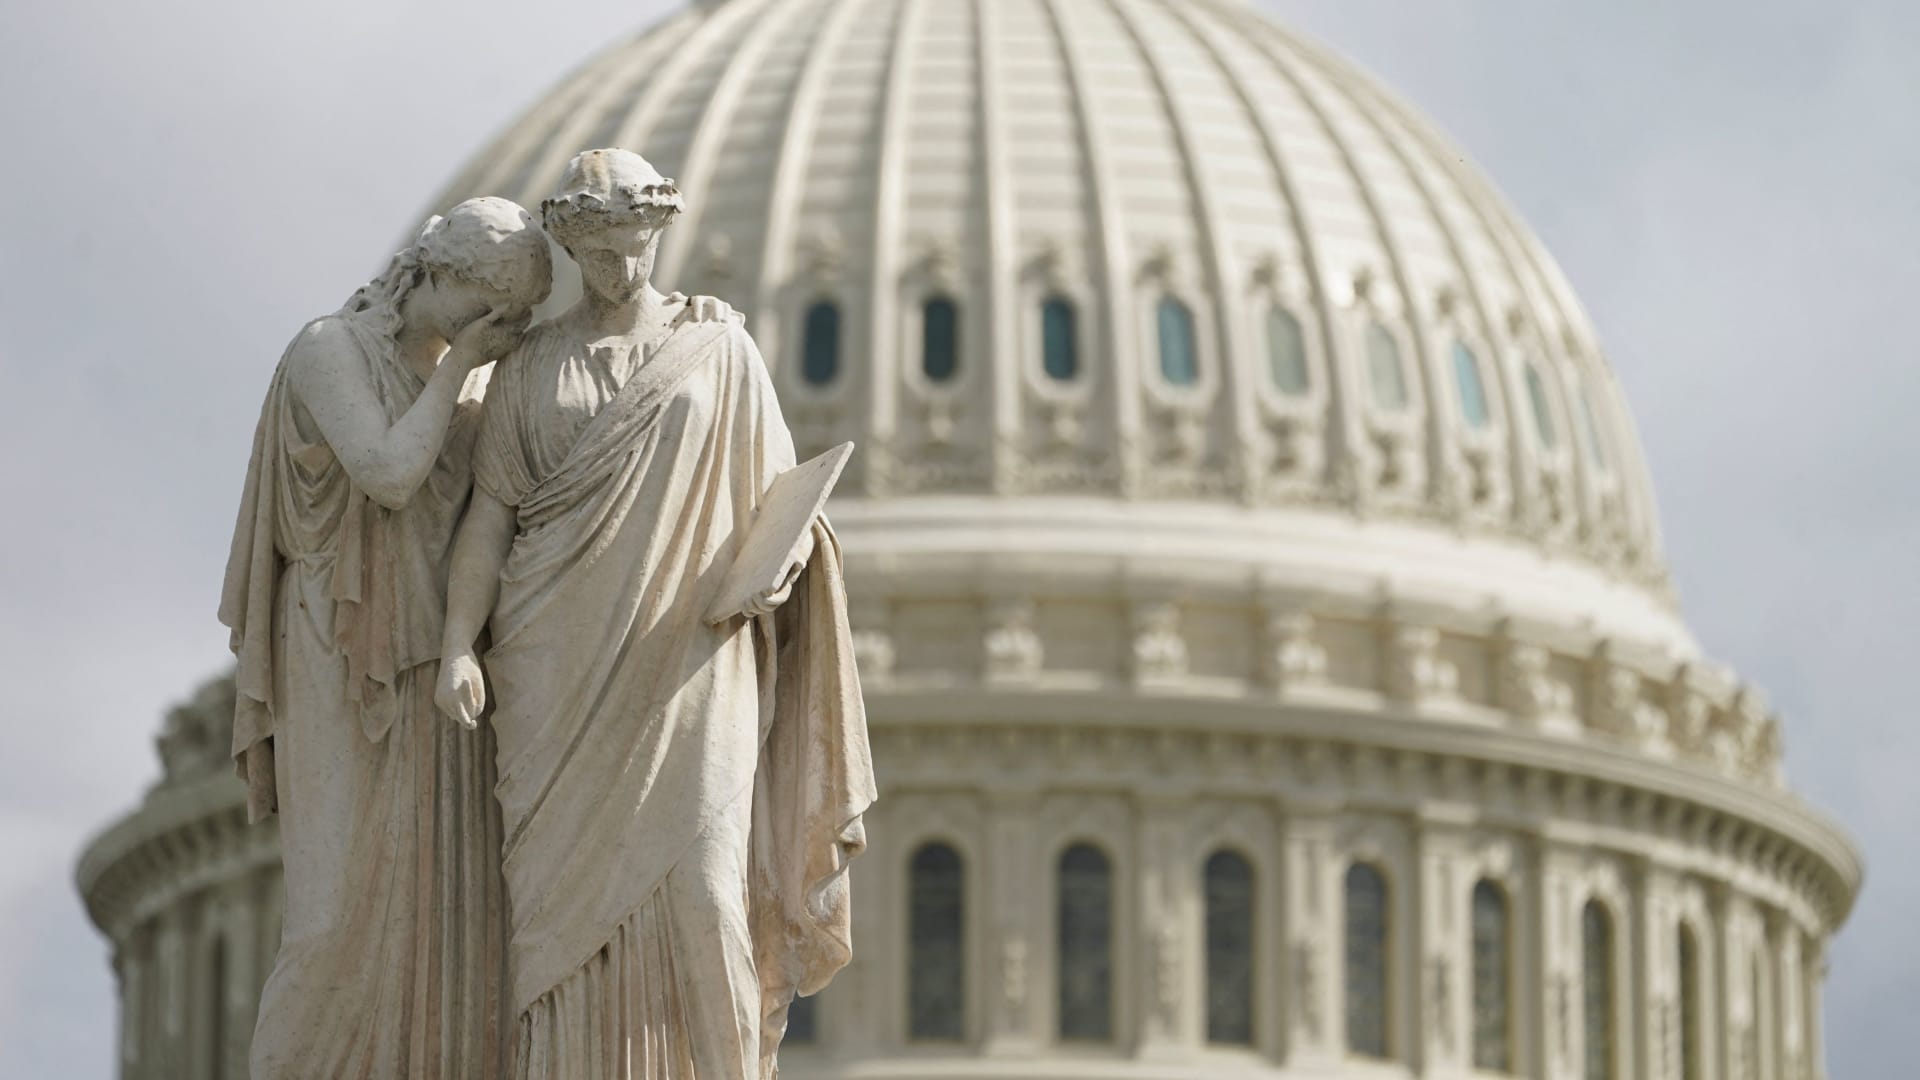 The U.S. Capitol's Peace Monument features the sculptures of Grief and History, while inside the building, House Republicans search for a new Speaker of the House following the ouster of Kevin McCarthy, in Washington, U.S., October 5, 2023. 